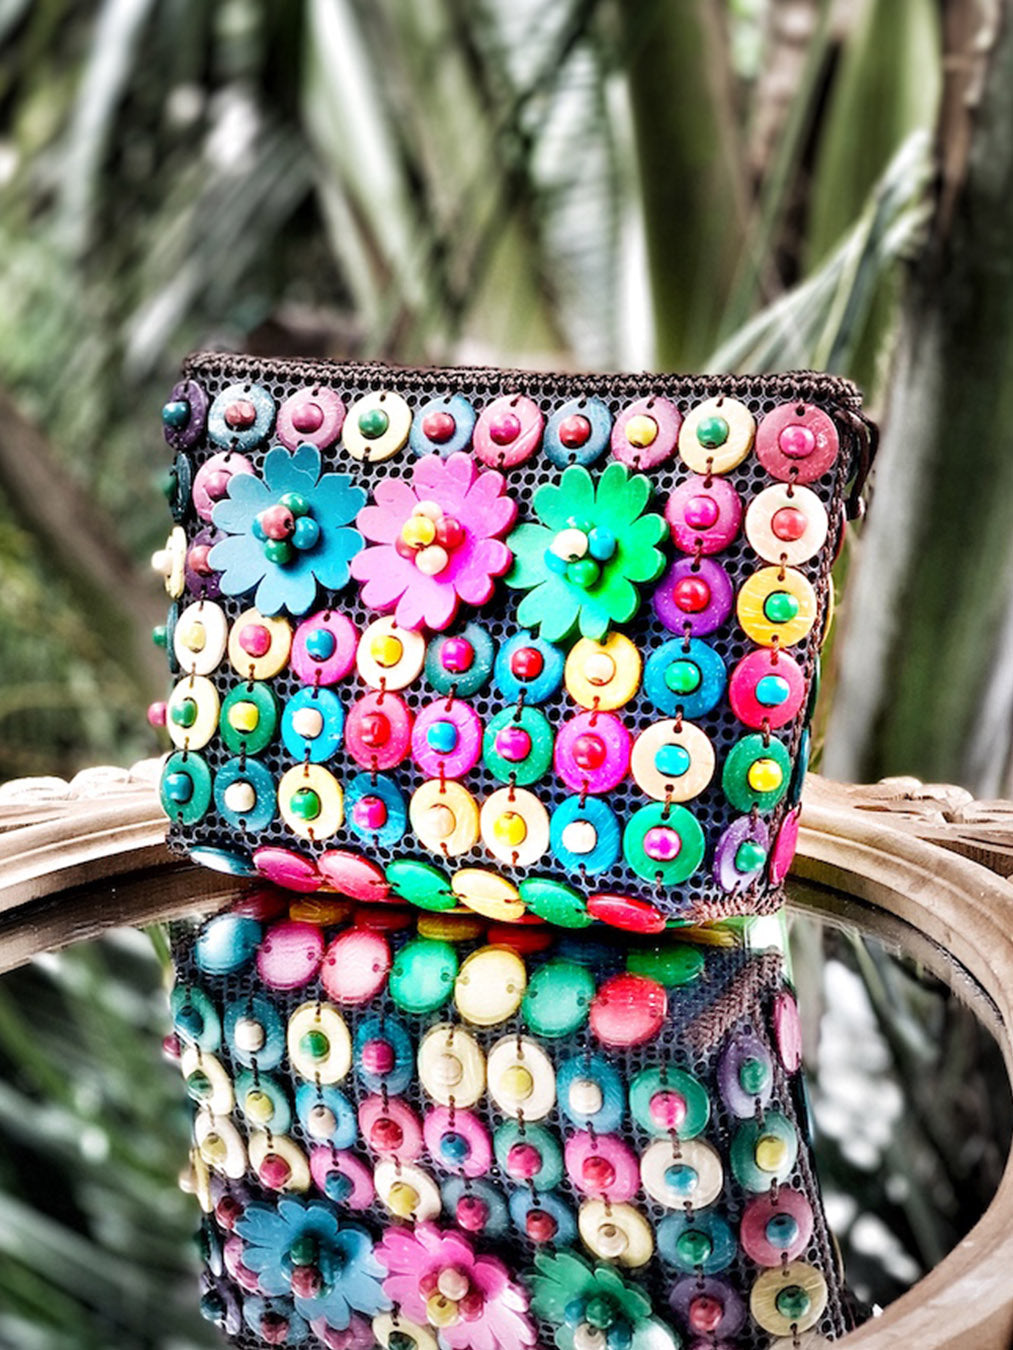 Coconut Shell Beaded Clutches for Women, Purse, Handmade Natural Style